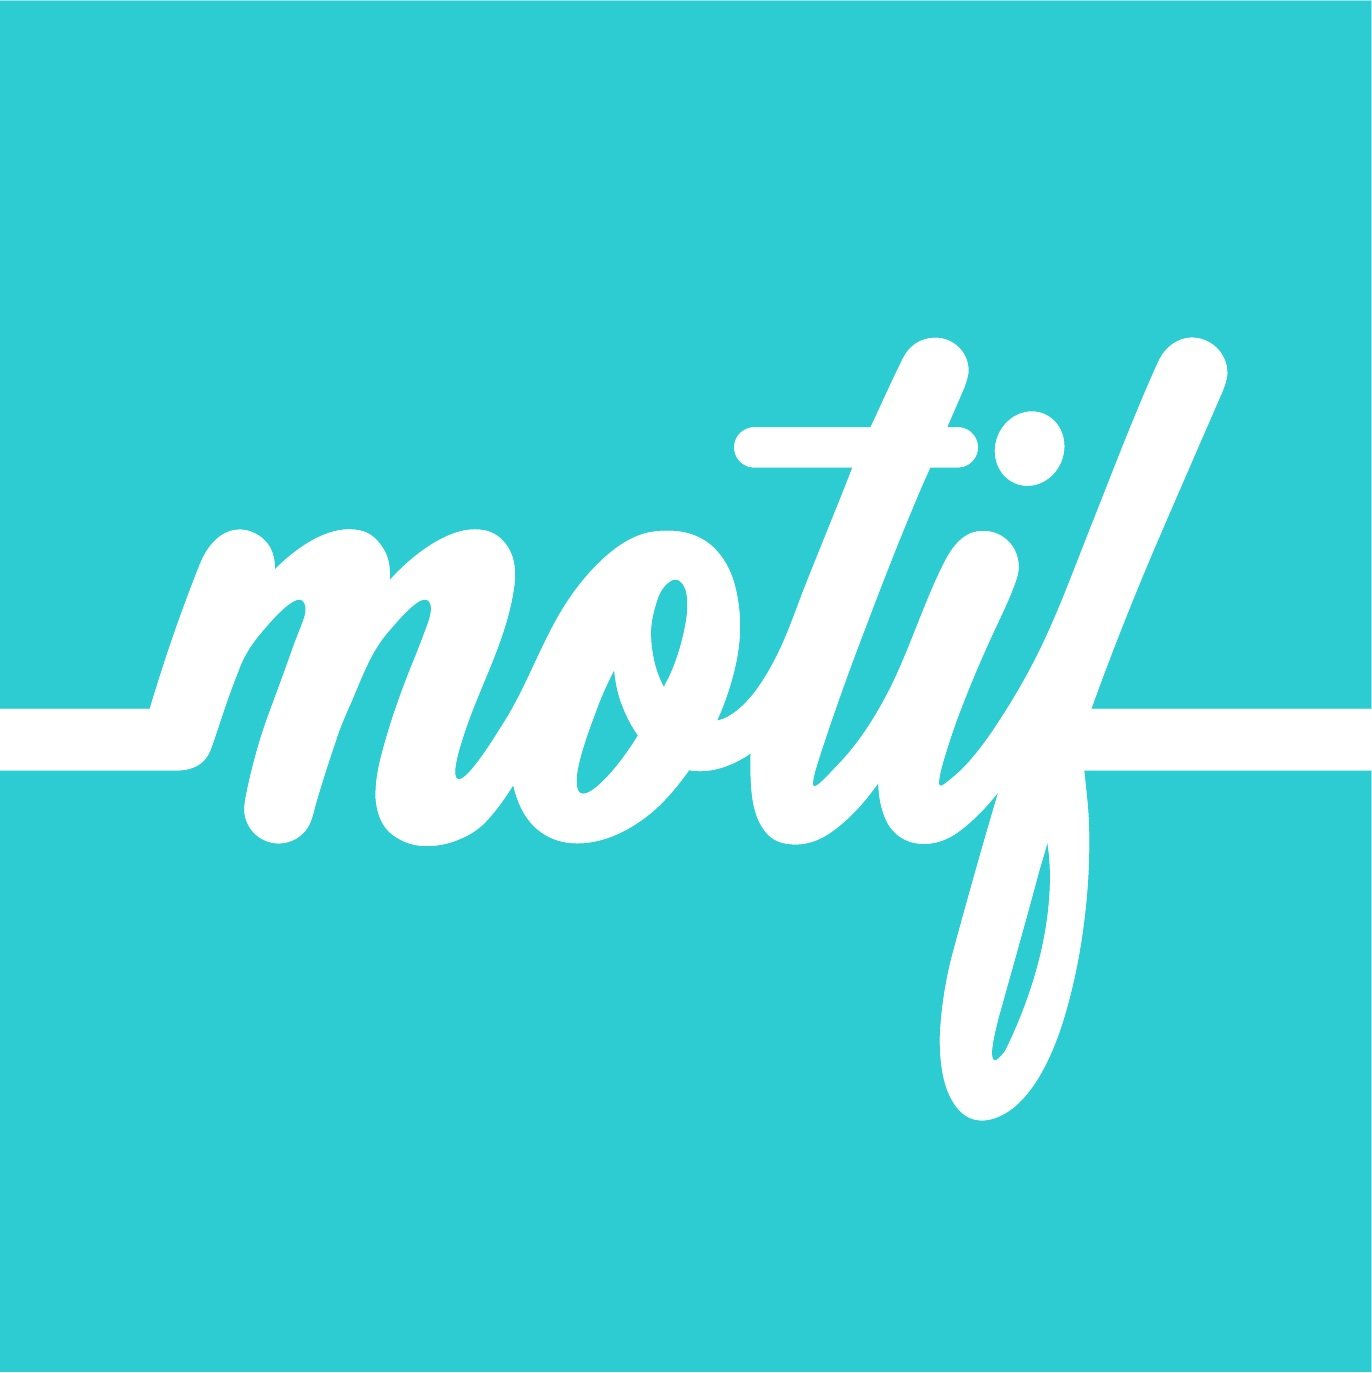  Motif FoodWorks is an innovative food and ingredient company that combines science and technology to deliver breakthrough plant-based products. Focused on delivering all the sensory experiences the consumer enjoys, Motif sells ingredients to CPG com